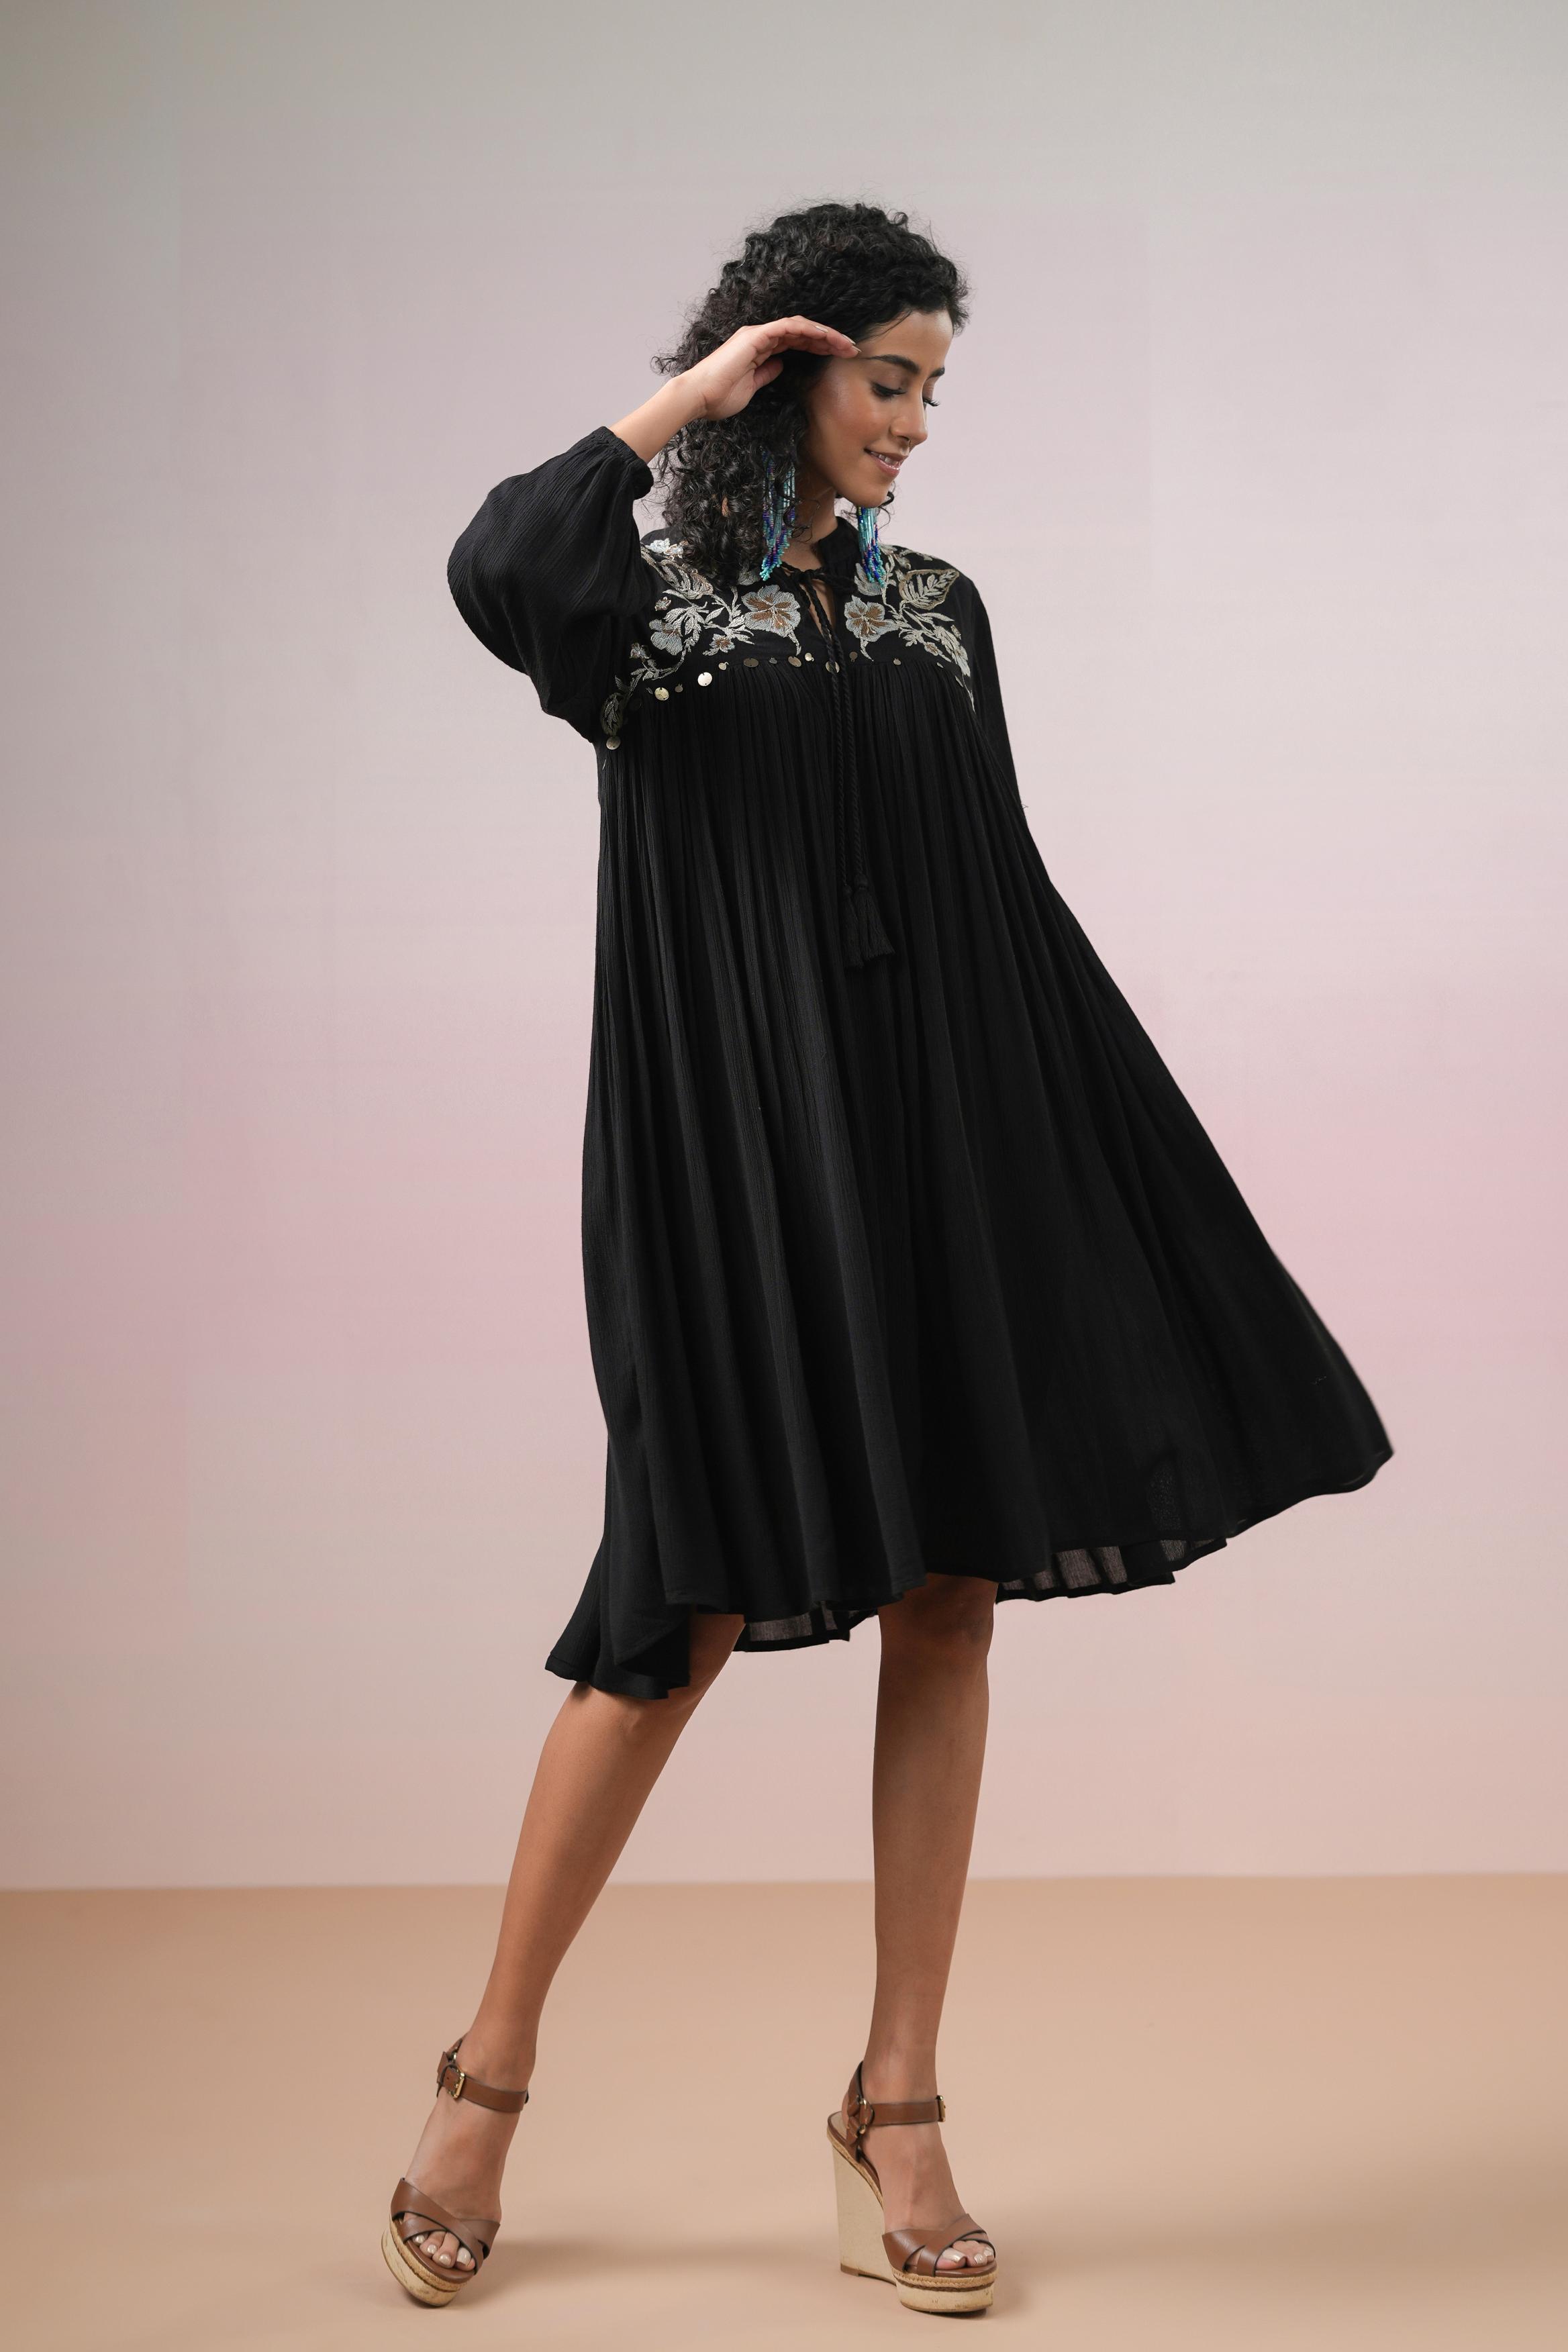 Black Floral Embroidered Italian Linen Dress